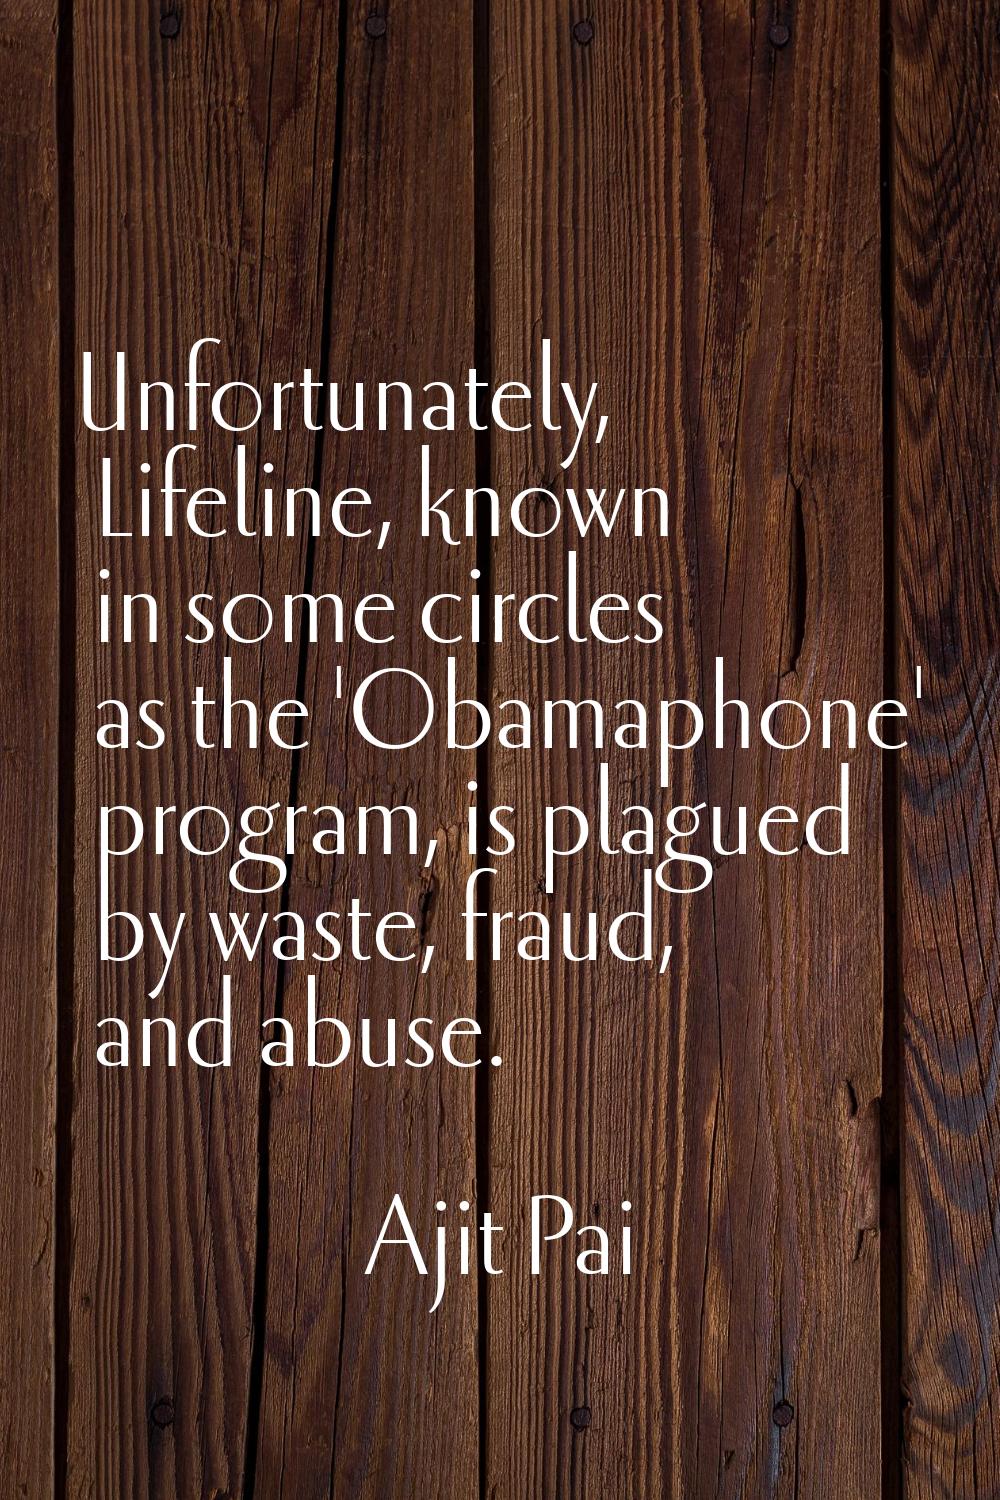 Unfortunately, Lifeline, known in some circles as the 'Obamaphone' program, is plagued by waste, fr